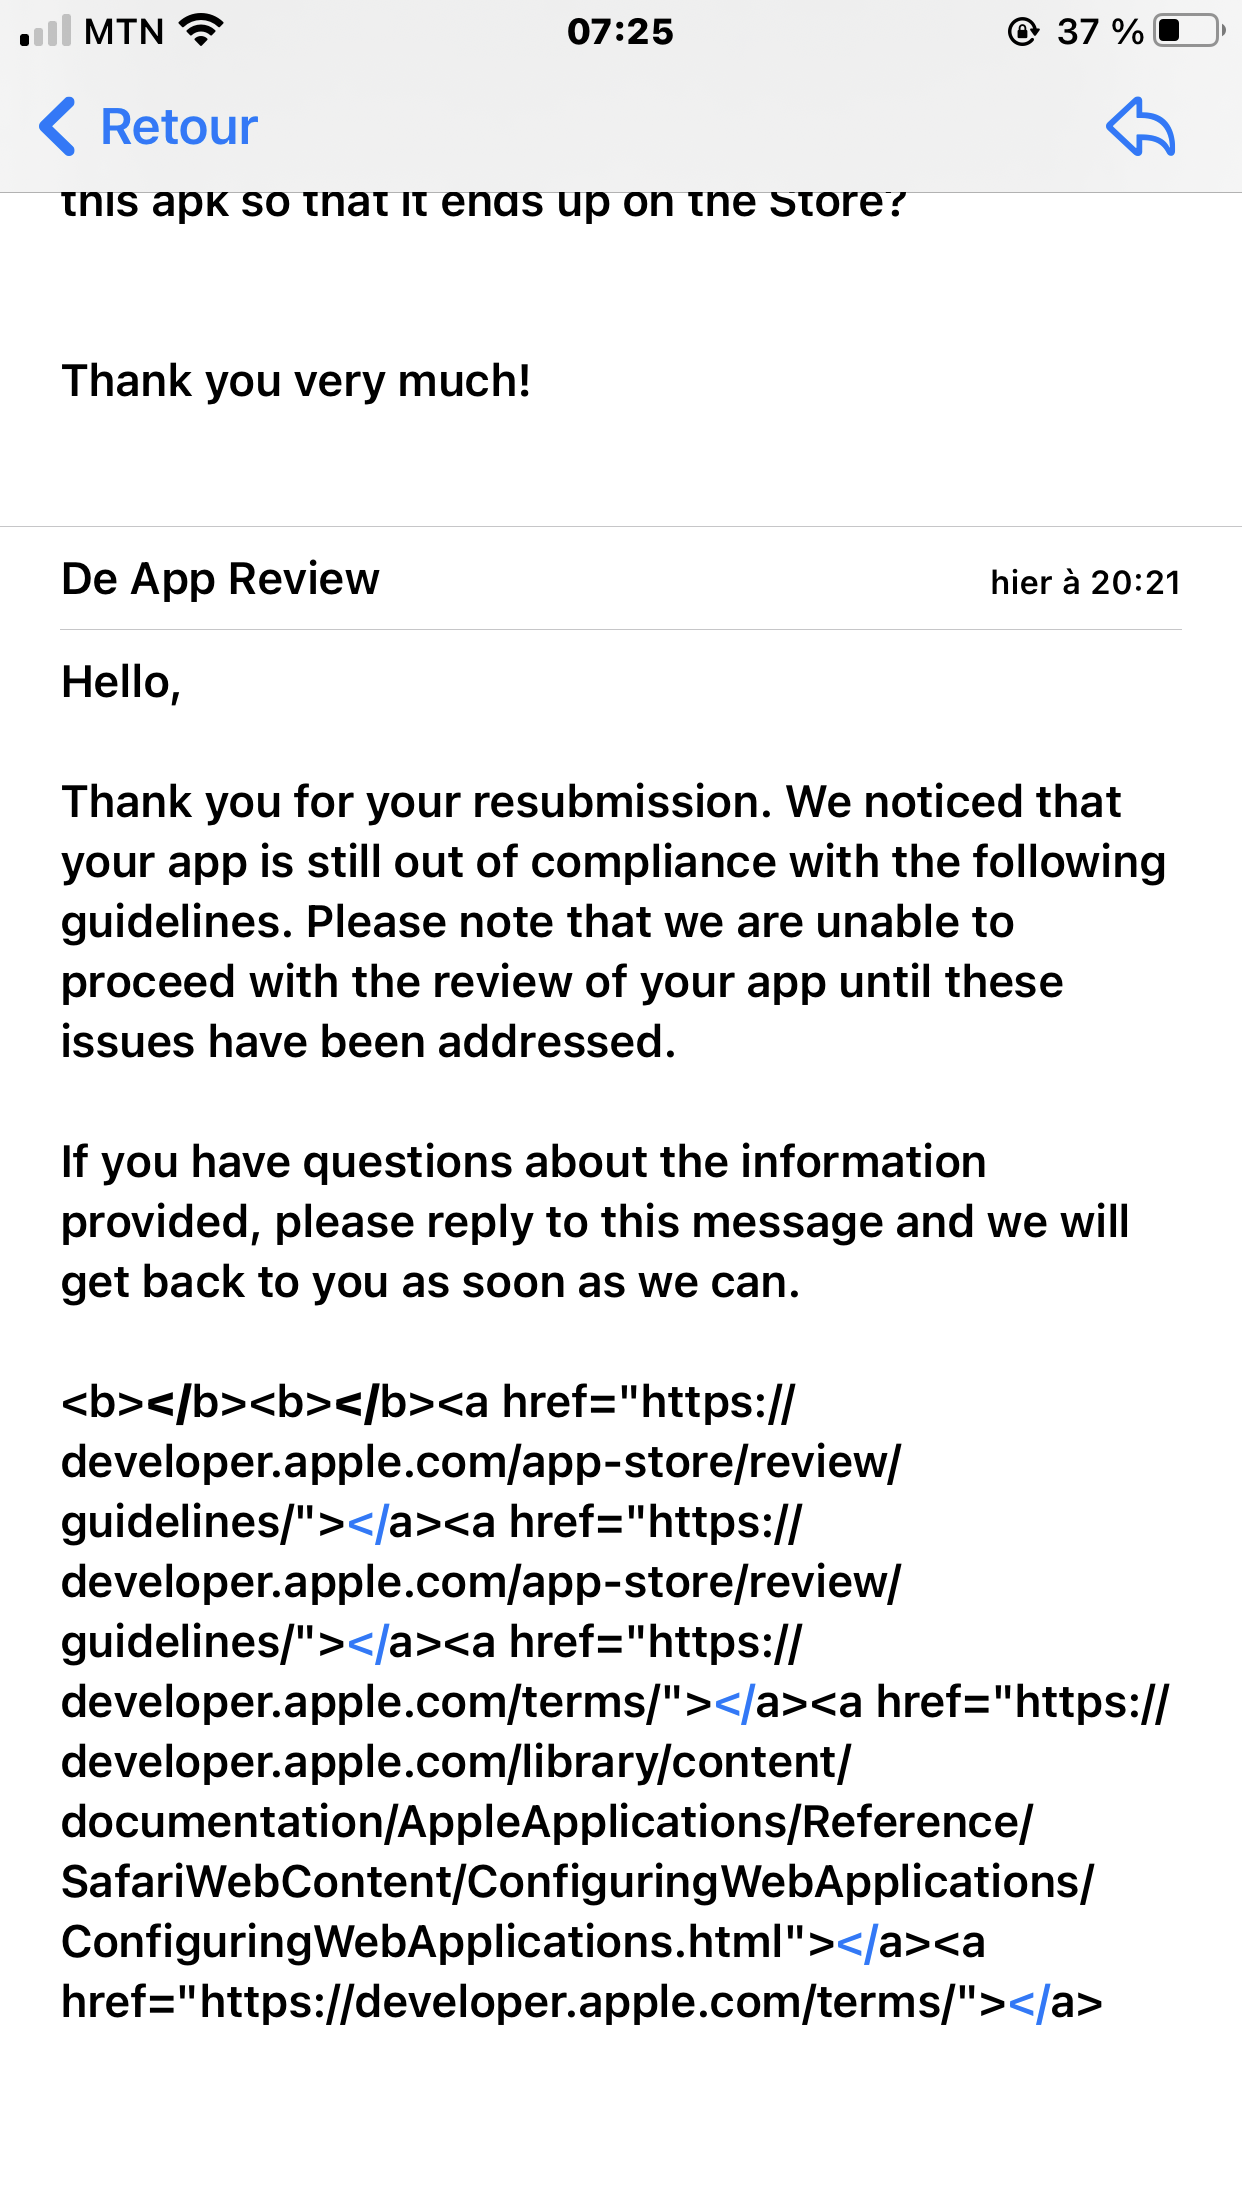 expeditie Mysterie pk Apple considers my app as Spam. Wh… | Apple Developer Forums